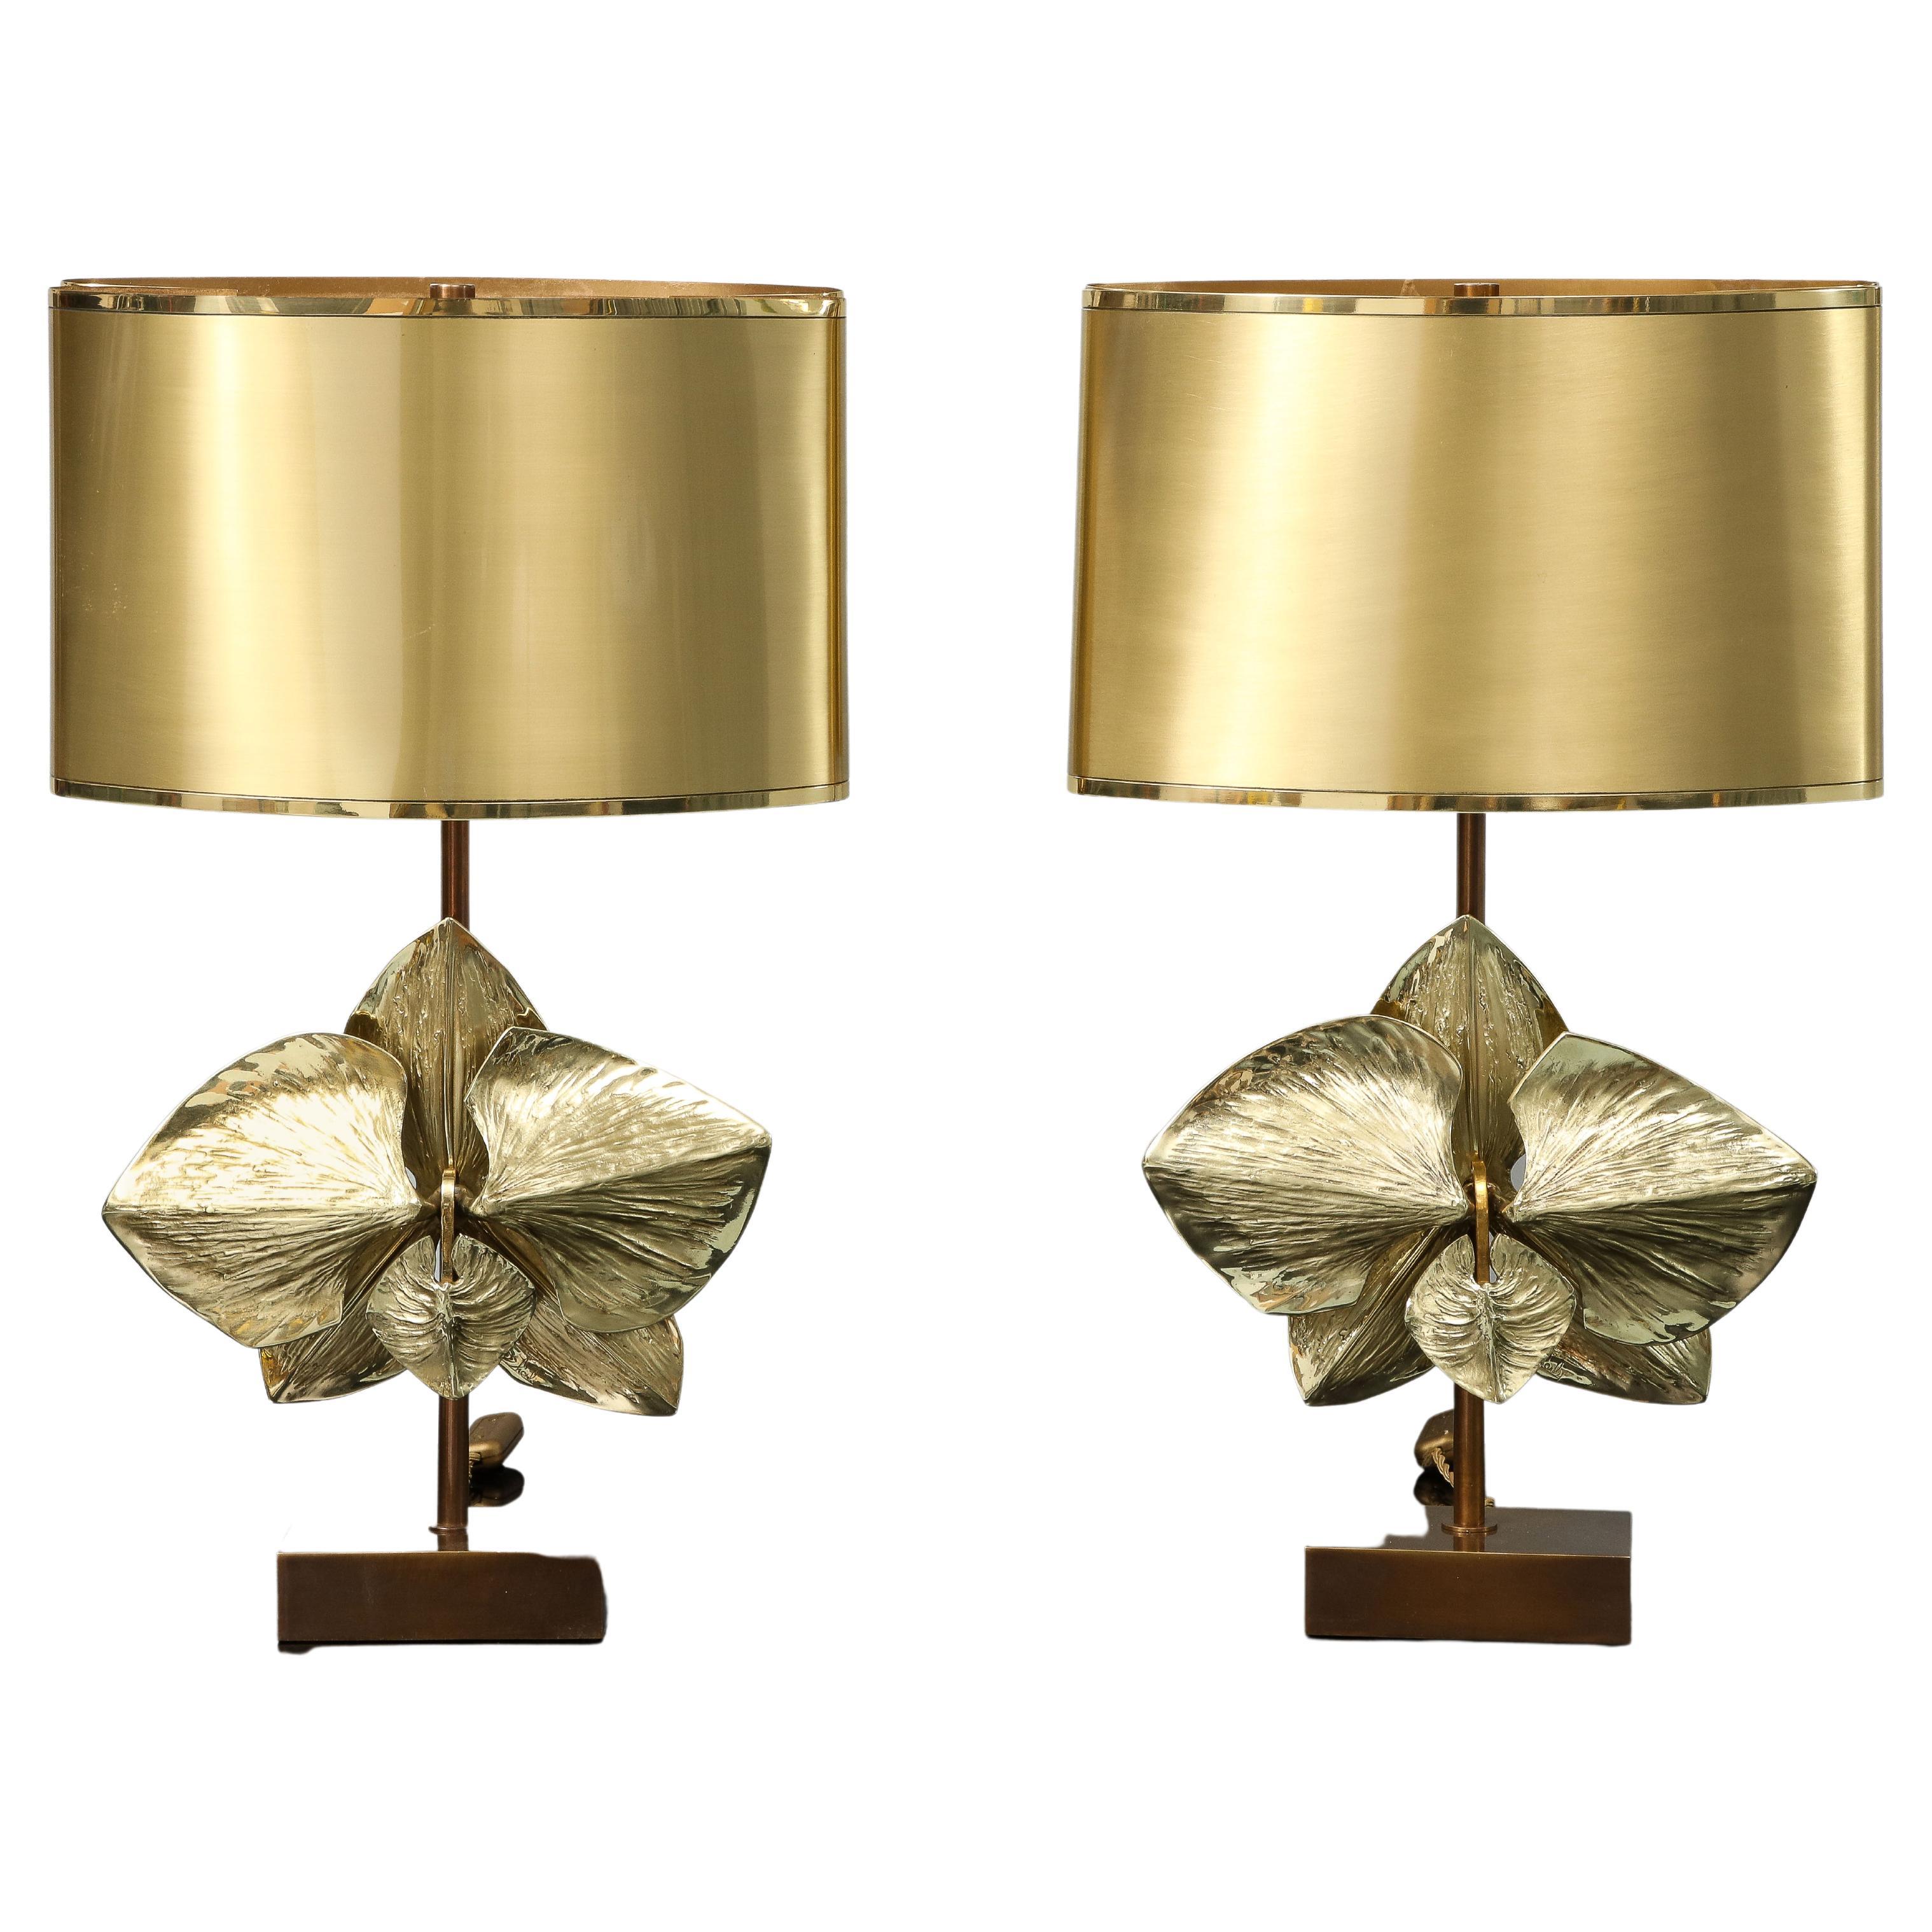 This pair of table lamps made by Maison Charles in its Atelier in Paris in the 1970's is referenced in its catalogue. Model 2155. It is signed and made in bronze. The shade is in brass with two tones of gold and the 2 halves of the shades are joined